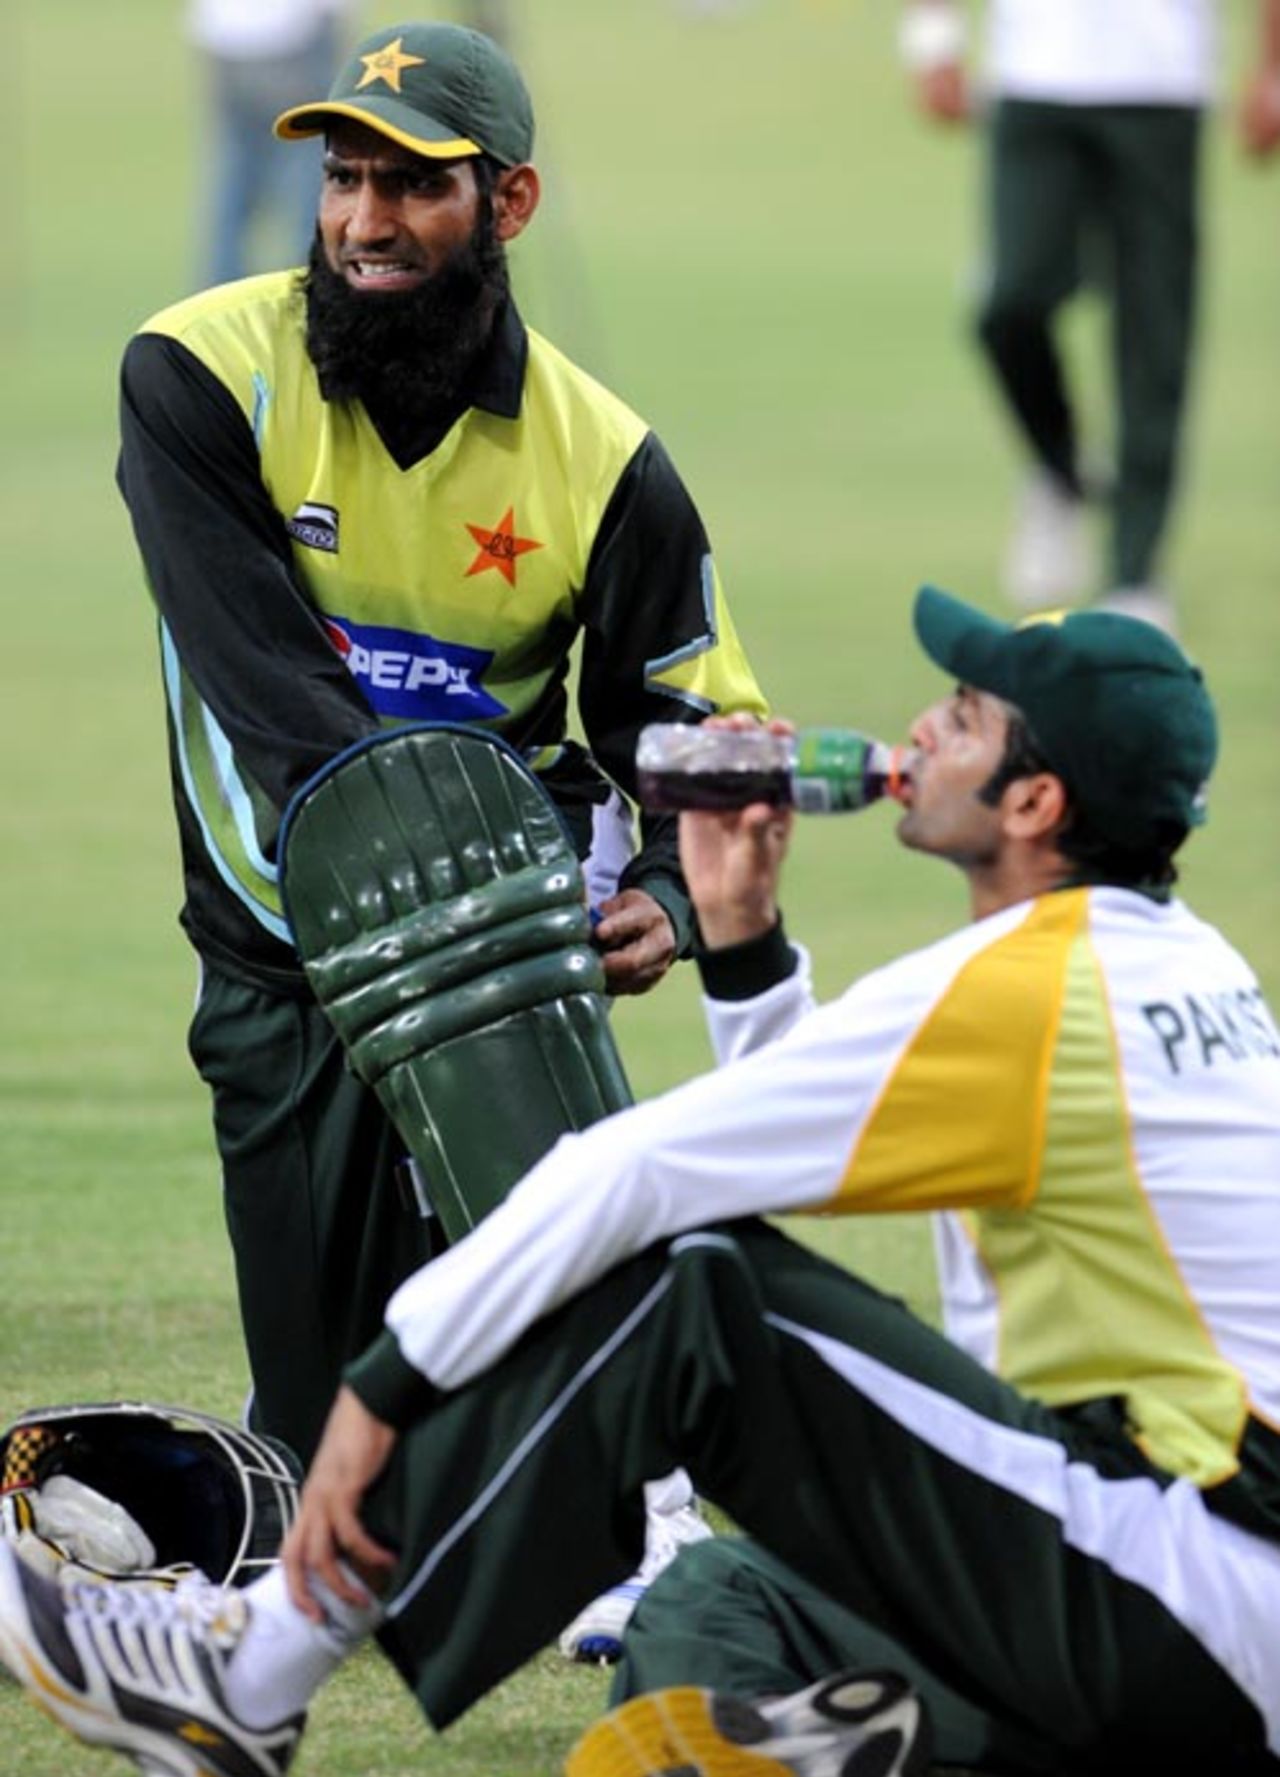 Mohammad Yousuf pads up while Shoaib Malik takes a break, Faisalabad, April 10, 2008